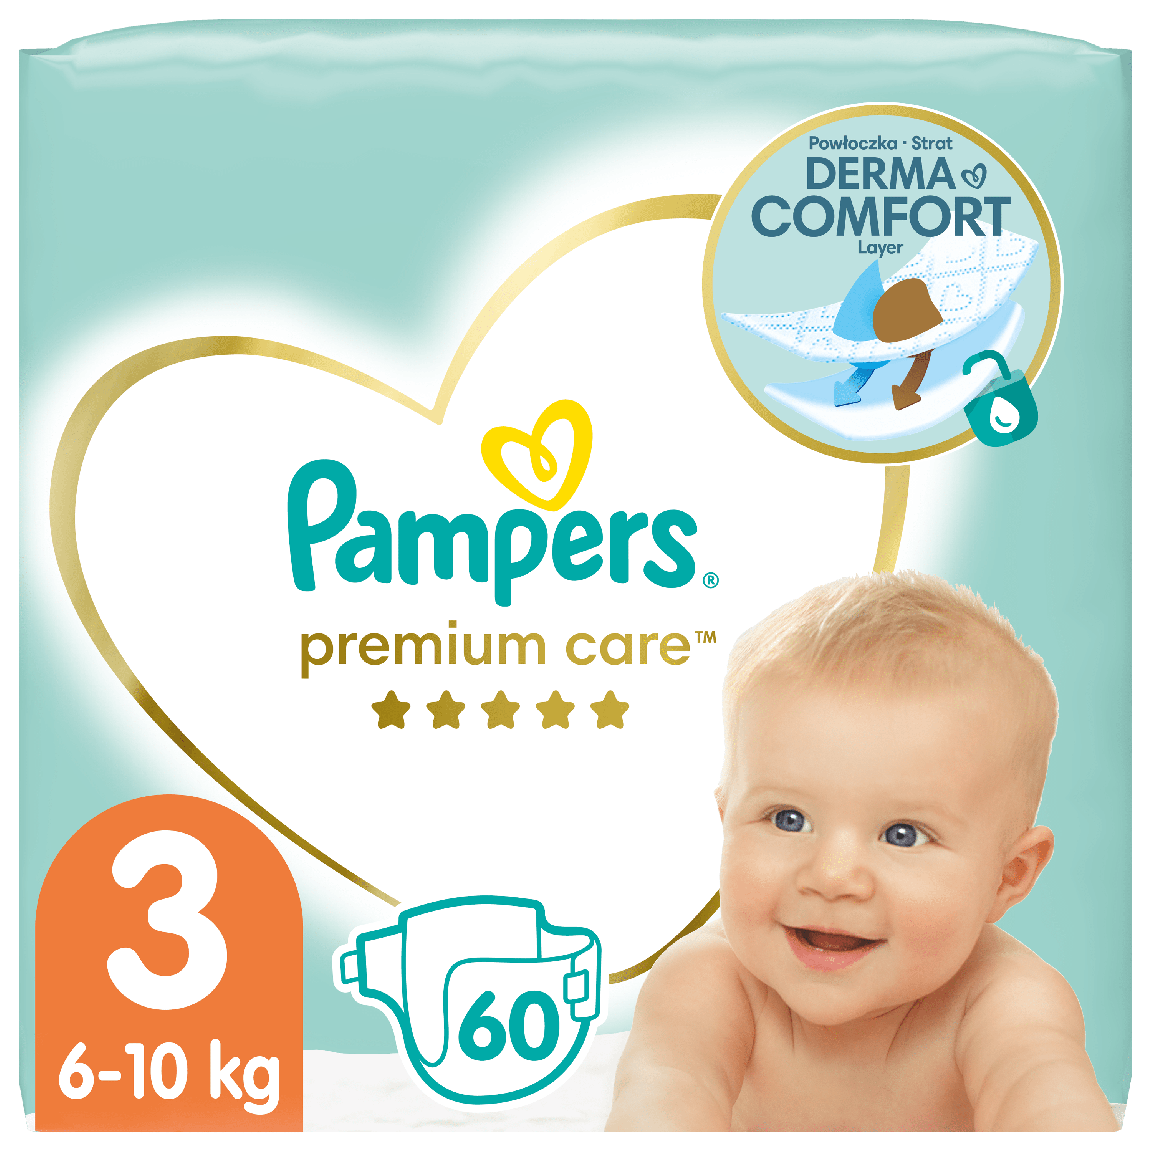 Pampers Club: Offre couches